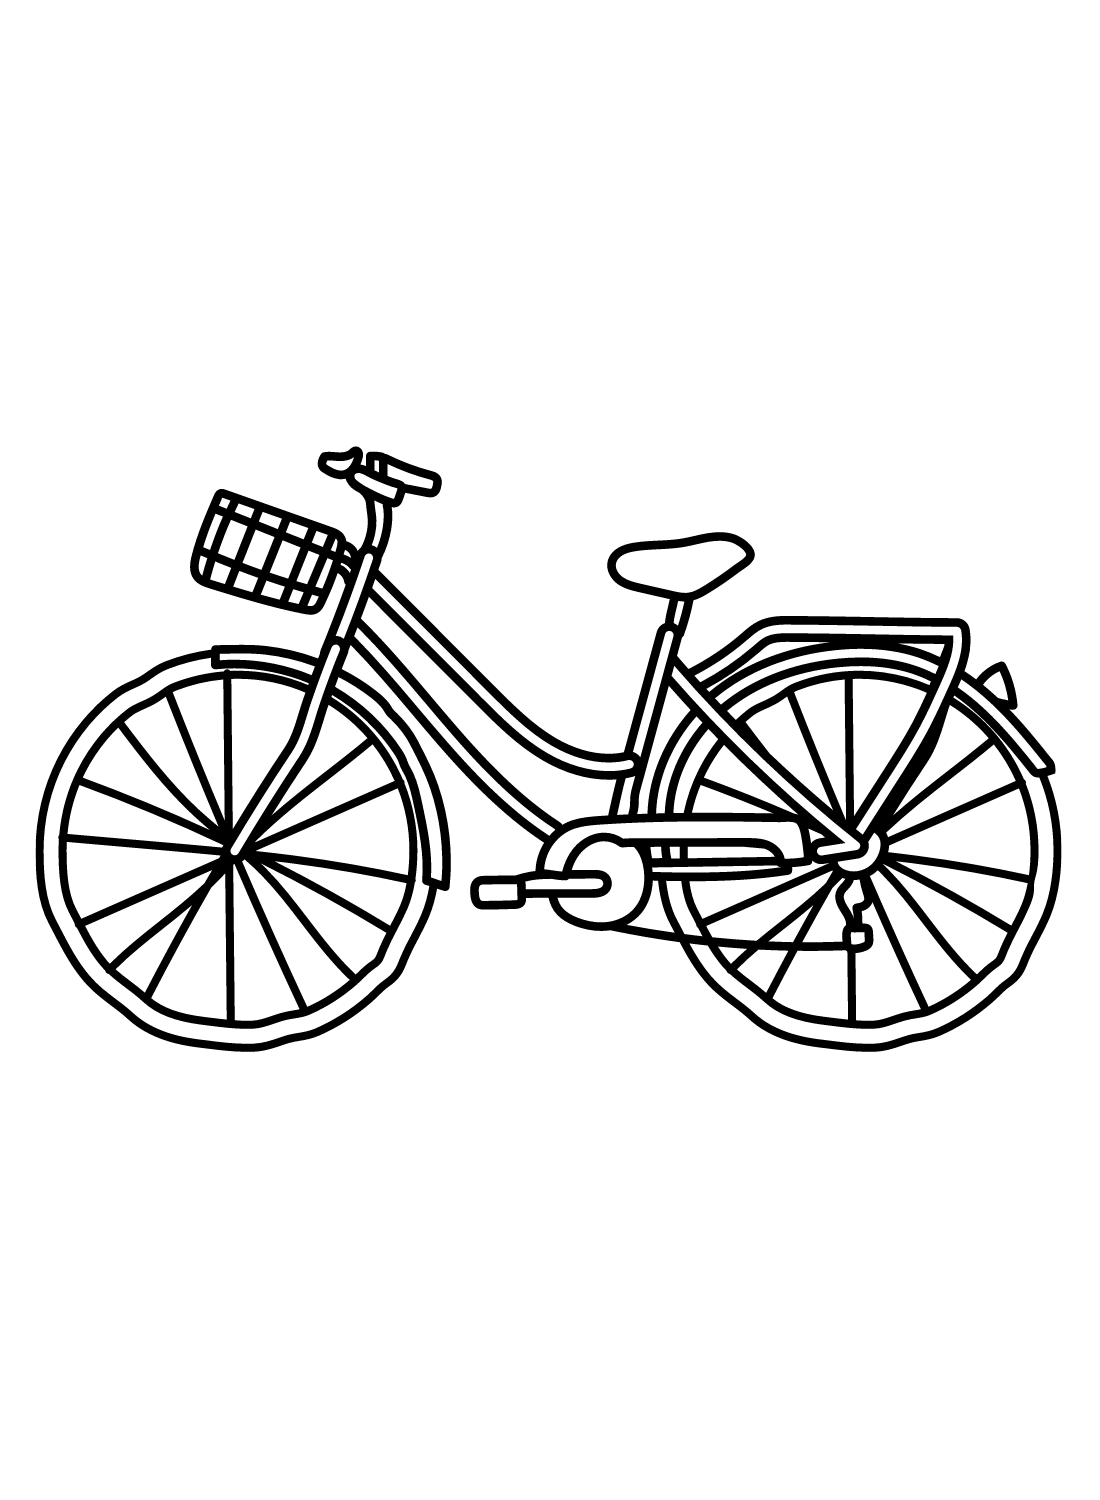 Print Bicycle Coloring Page